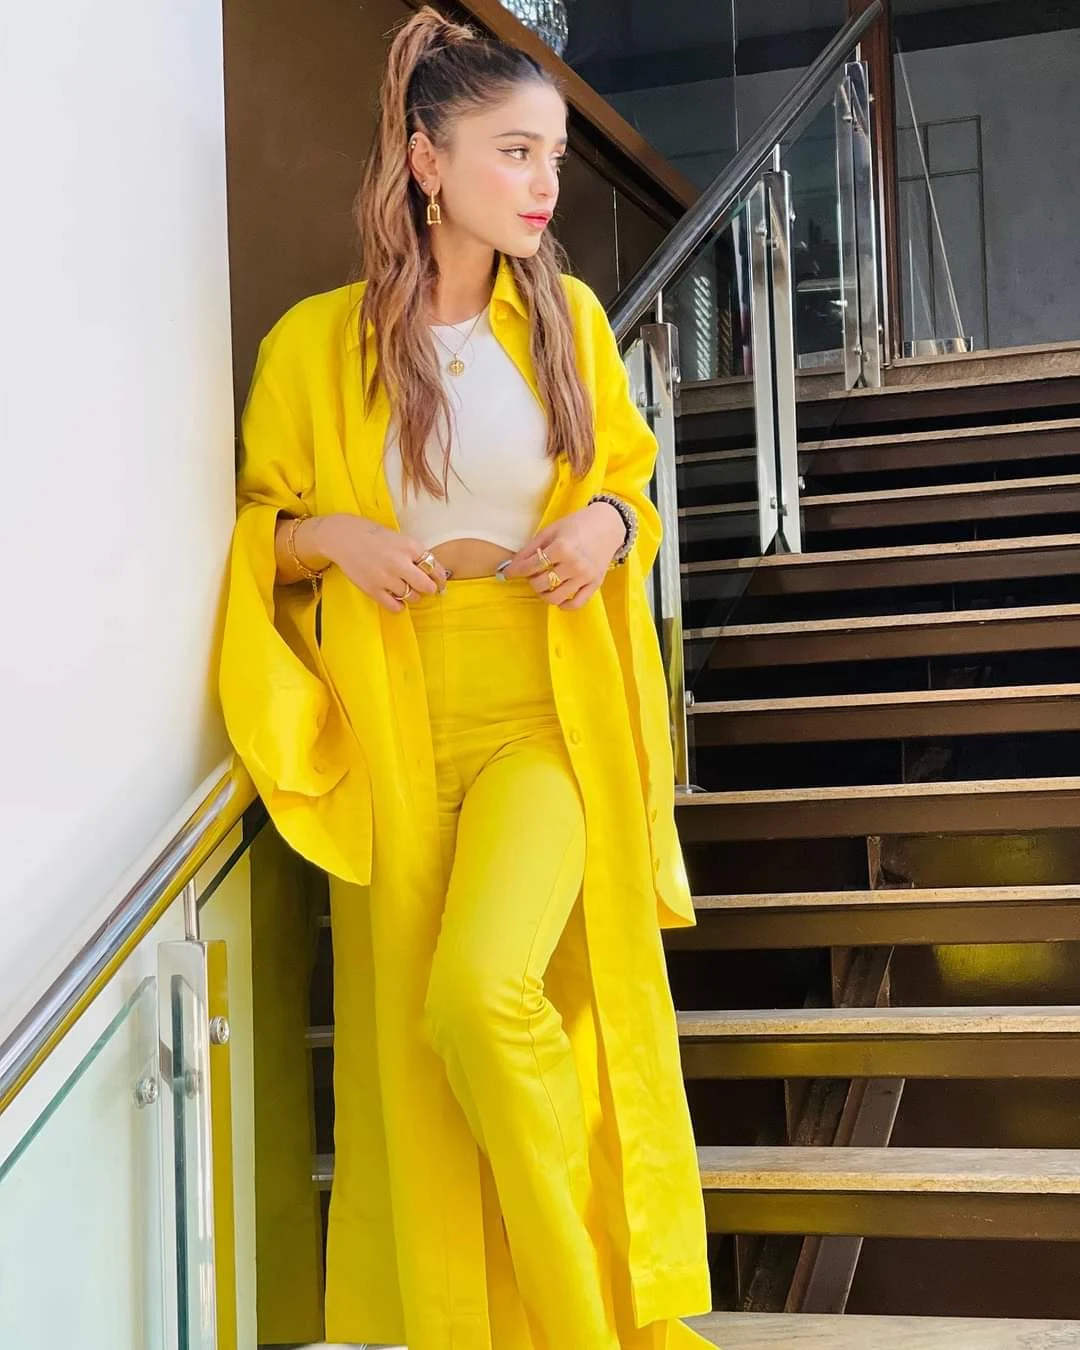 Aima Baig poses for photoshoot at a hotel before performing at Asia Cup.